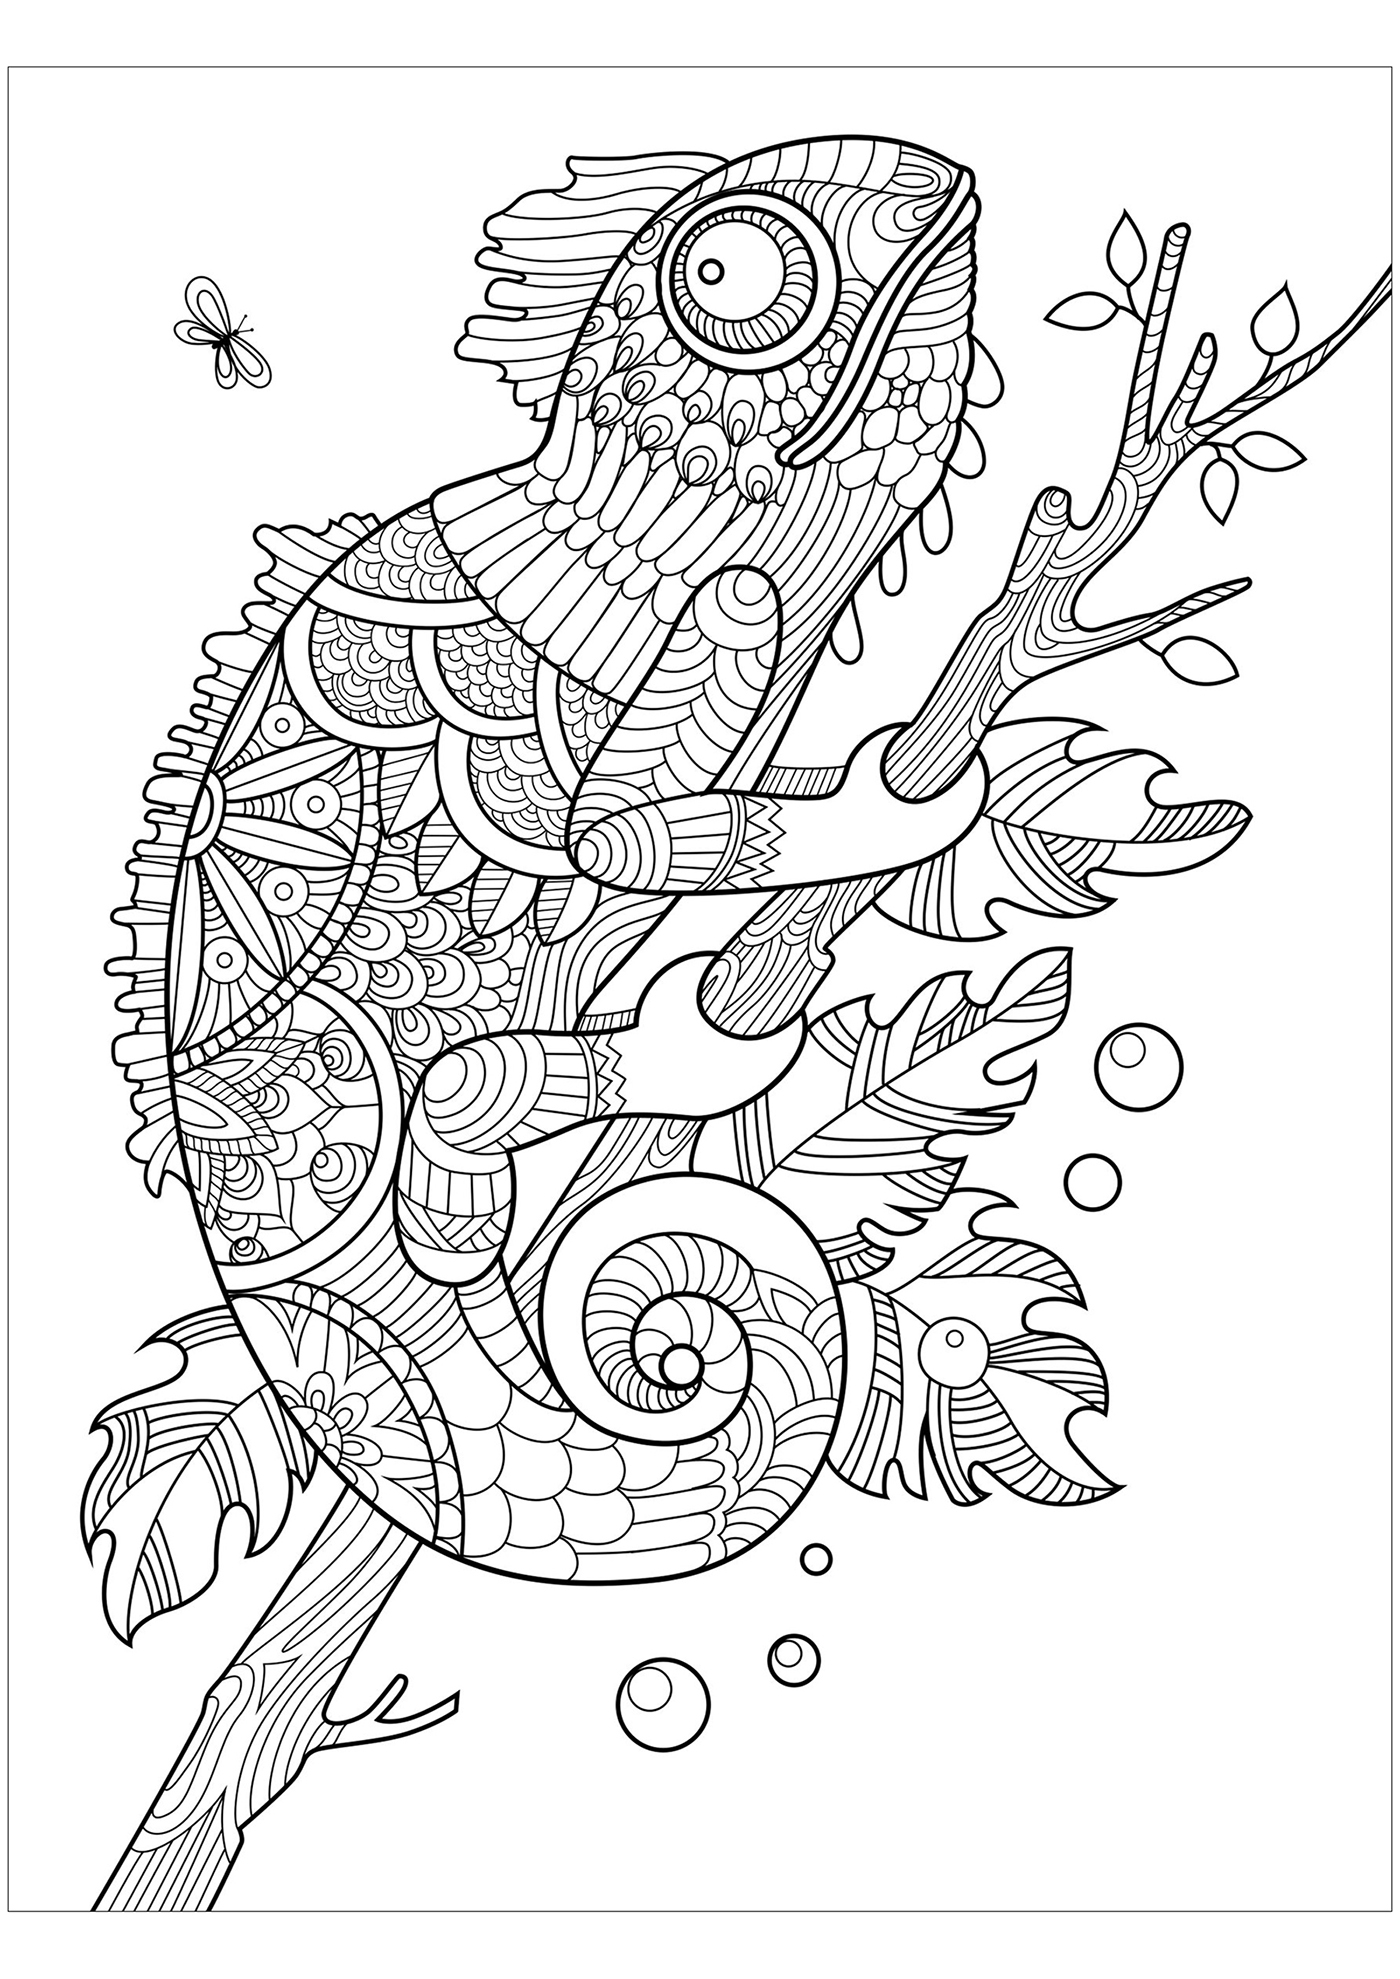 Chameleon with many simple Zentangle patterns.Don't forget to color the little fly that will quickly get eaten !, Artist : Alexpokusay   Source : 123rf